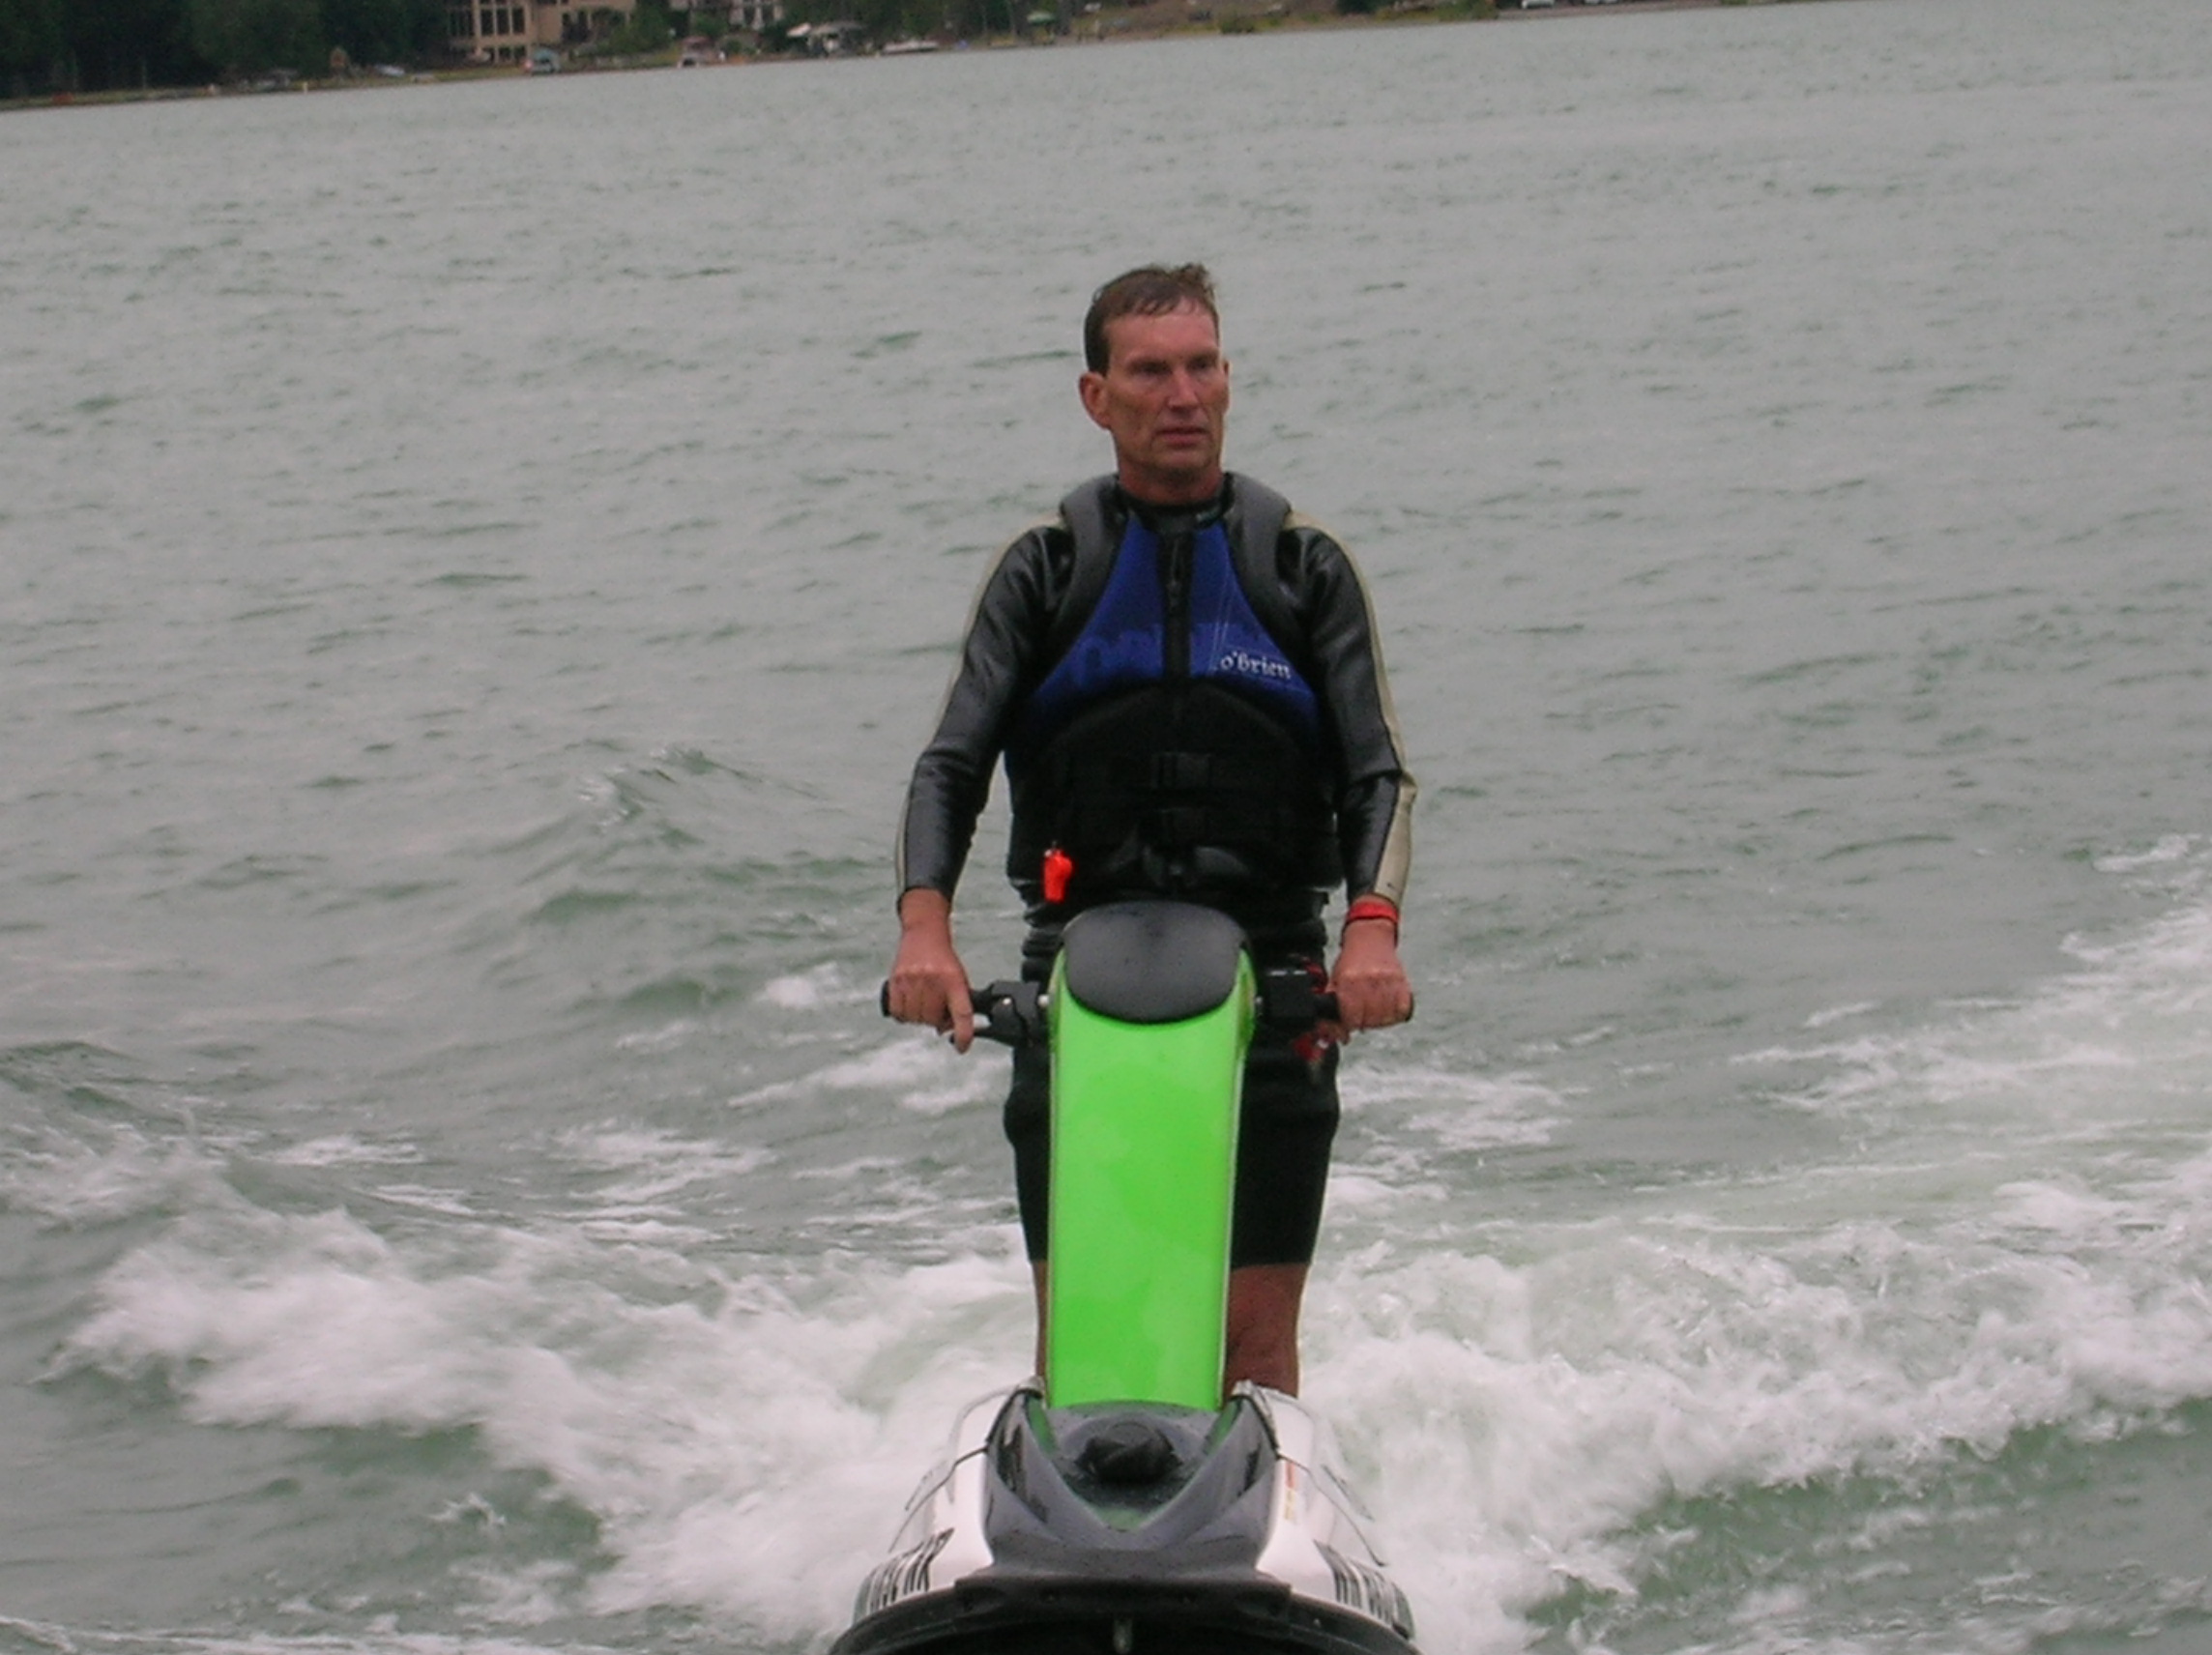 Stand-up Jet-Skiing